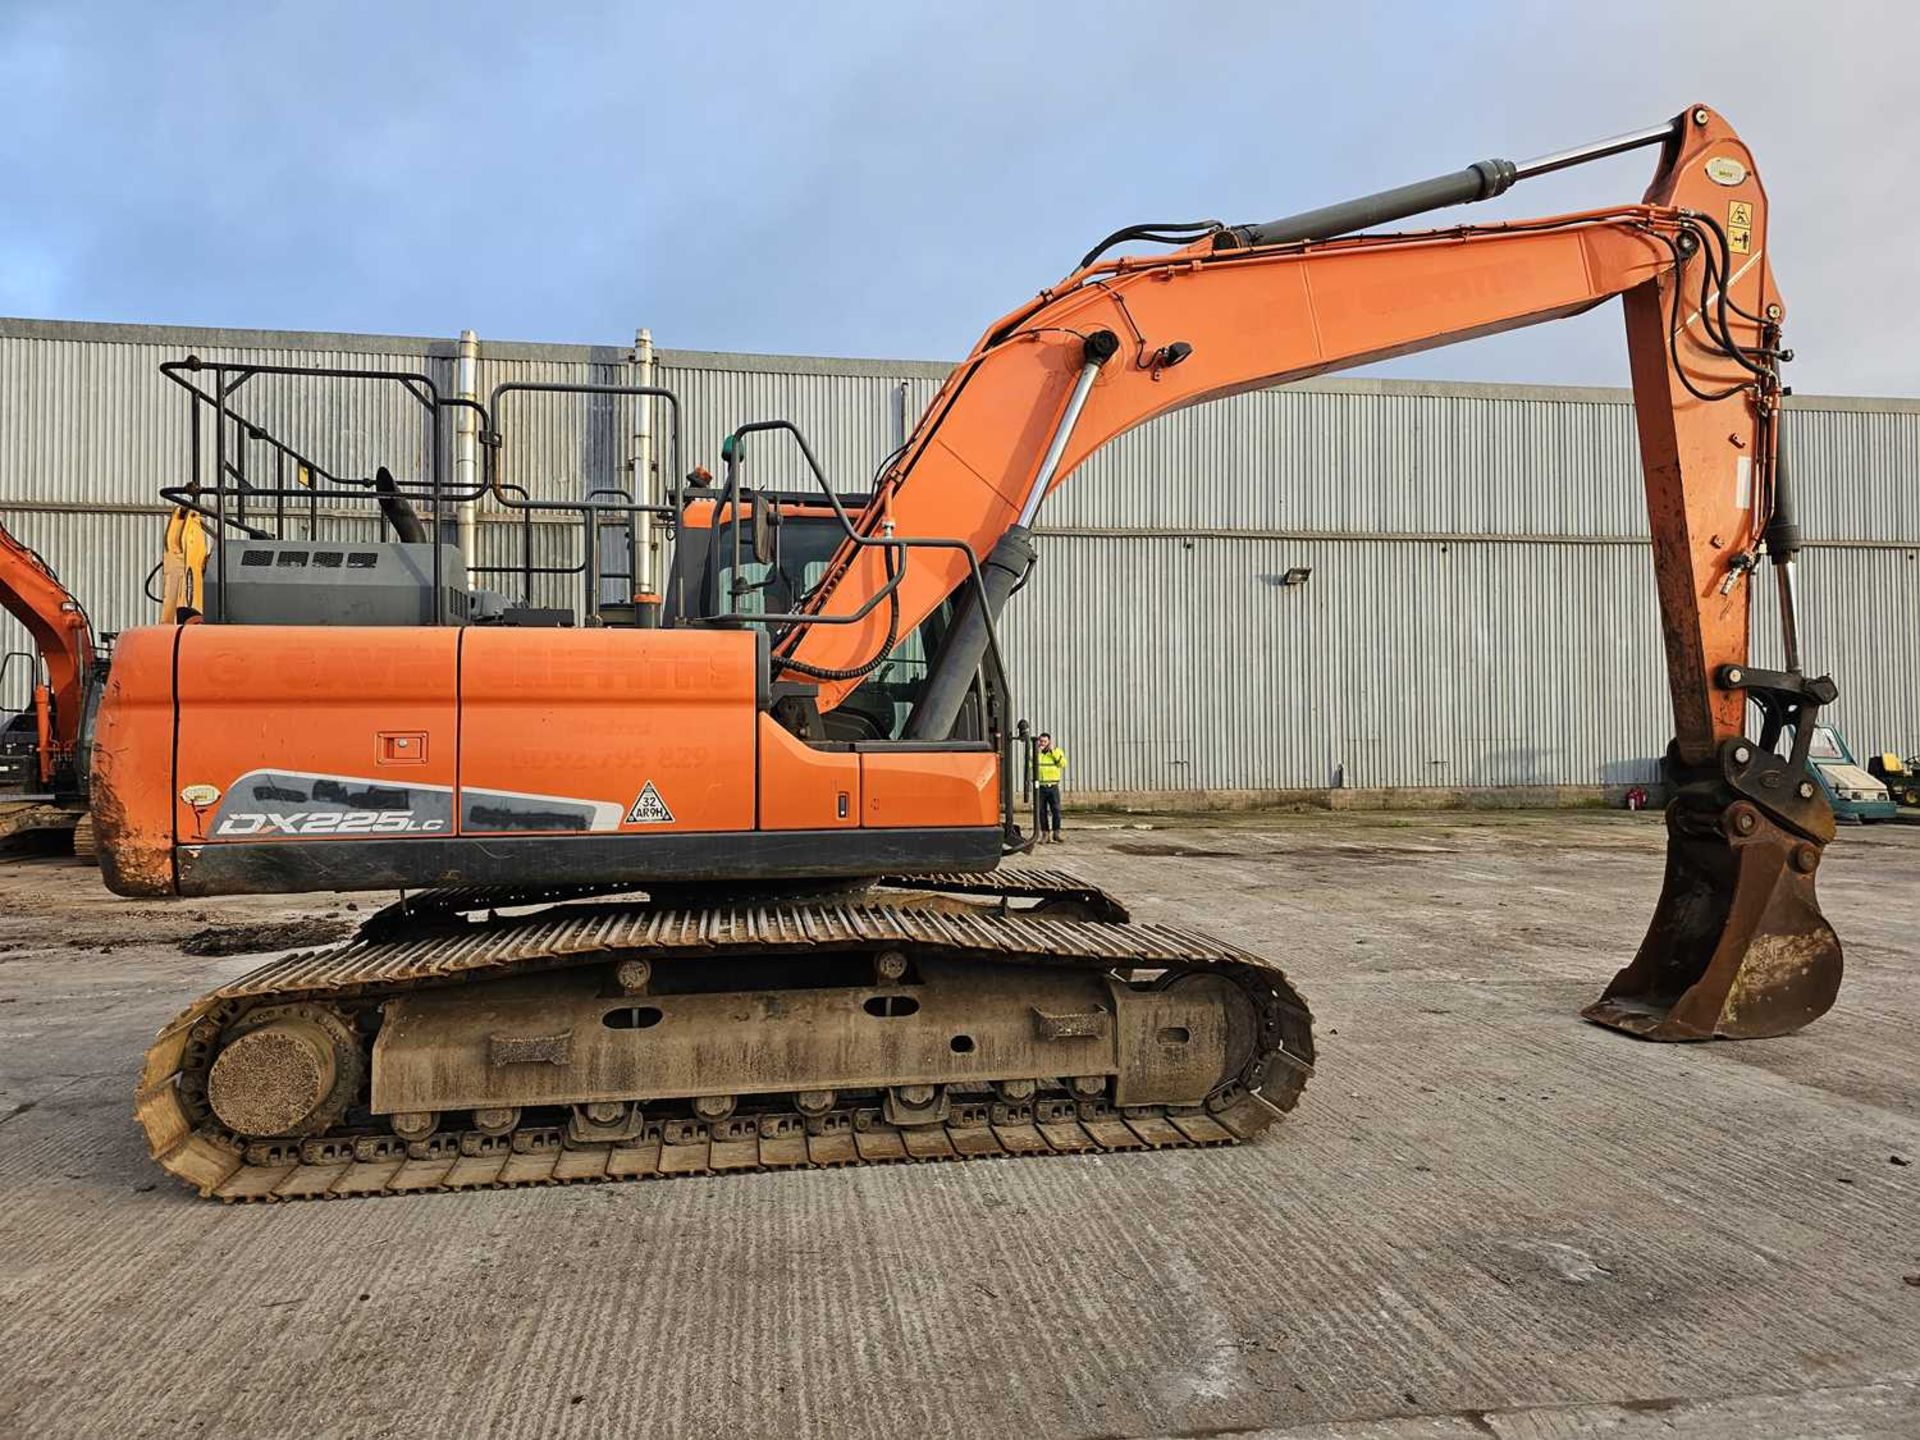 2018 Doosan DX225LC-5 800mm Pads, CV, Geith Hydraulic QH, Piped, Aux. Piping, Demo Cage, Reverse Cam - Image 6 of 36